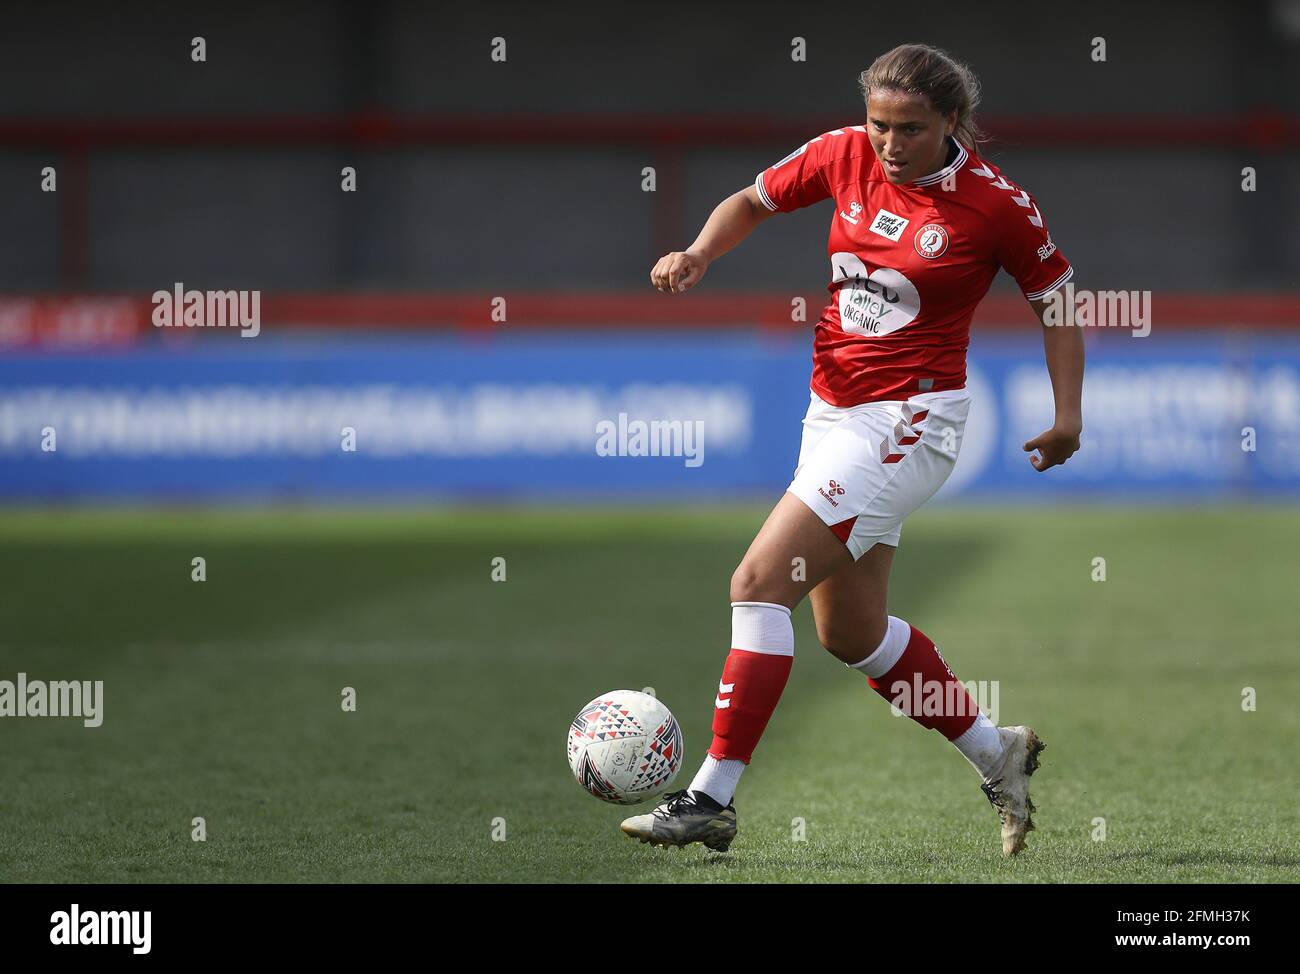 Crawley, UK. 9th May 2021. Abi Harrison of Bristol City during the FA Women's Super League match between Brighton & Hove Albion Women and Bristol City Women at The People's Pension Stadium on May 9th 2021 in Crawley, United Kingdom Stock Photo